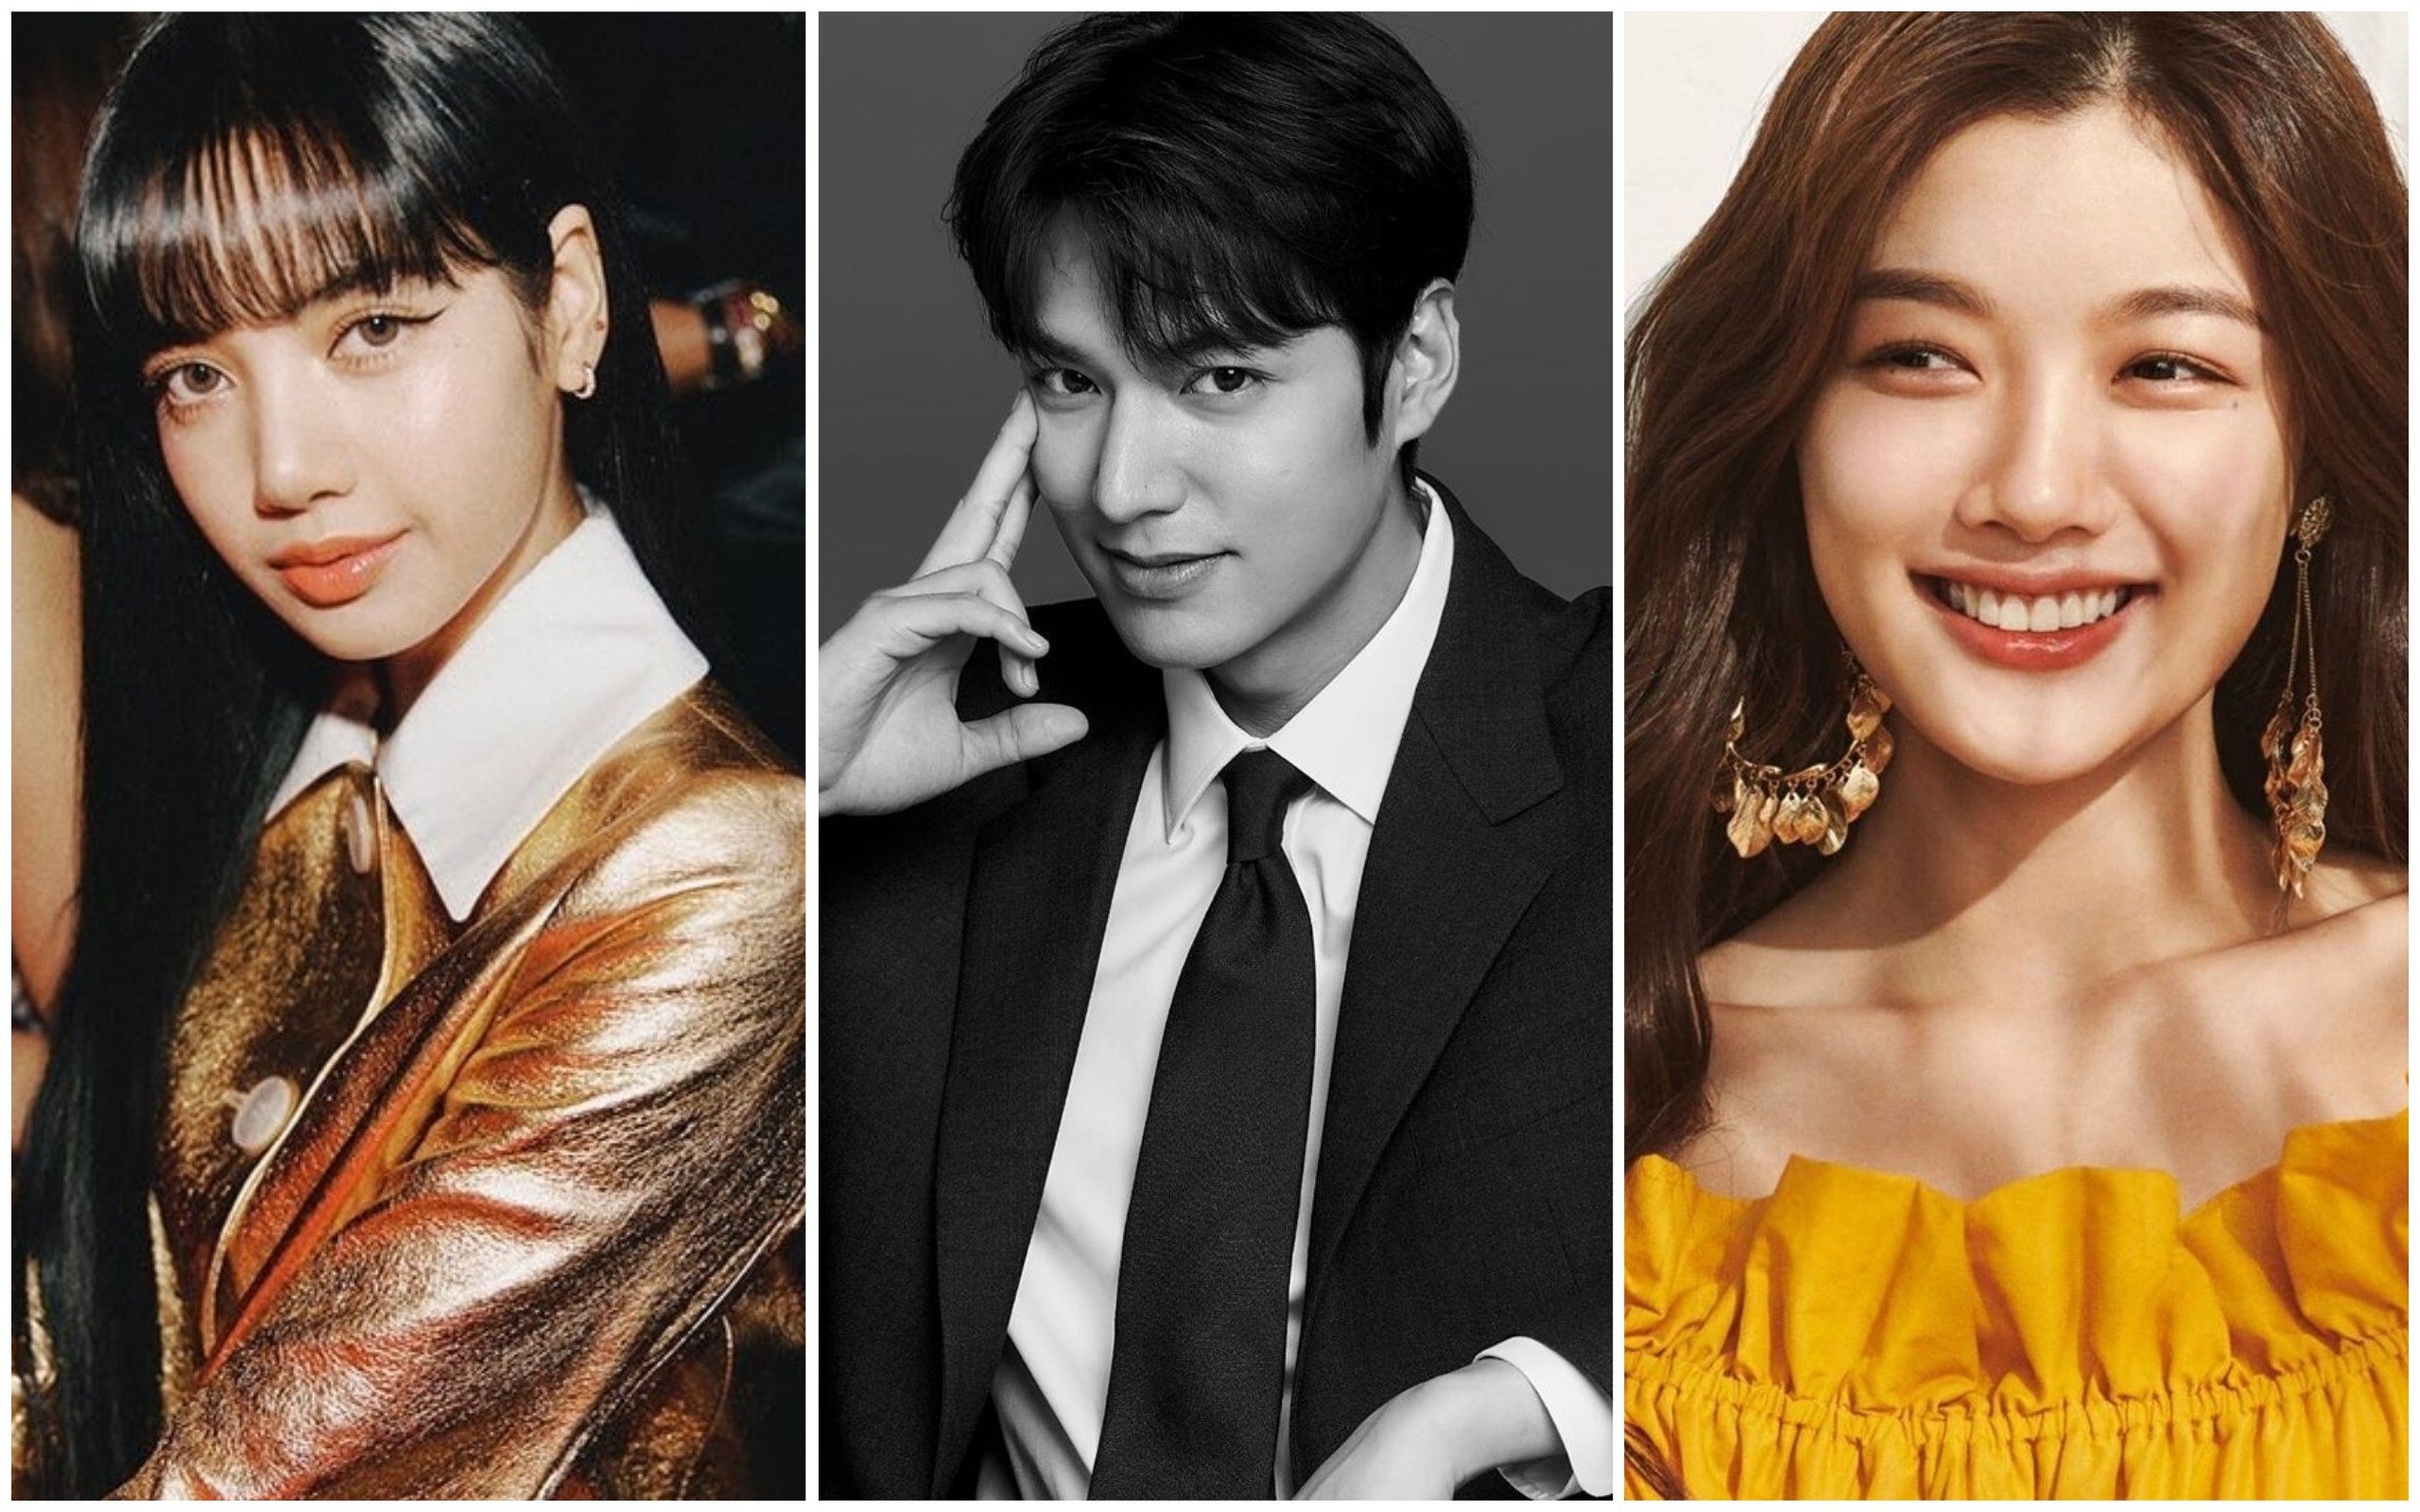 Blackpink's Lisa, Lee Min Ho and Kim Yoo-Jung hit the headlines this month. Photo: Instagram